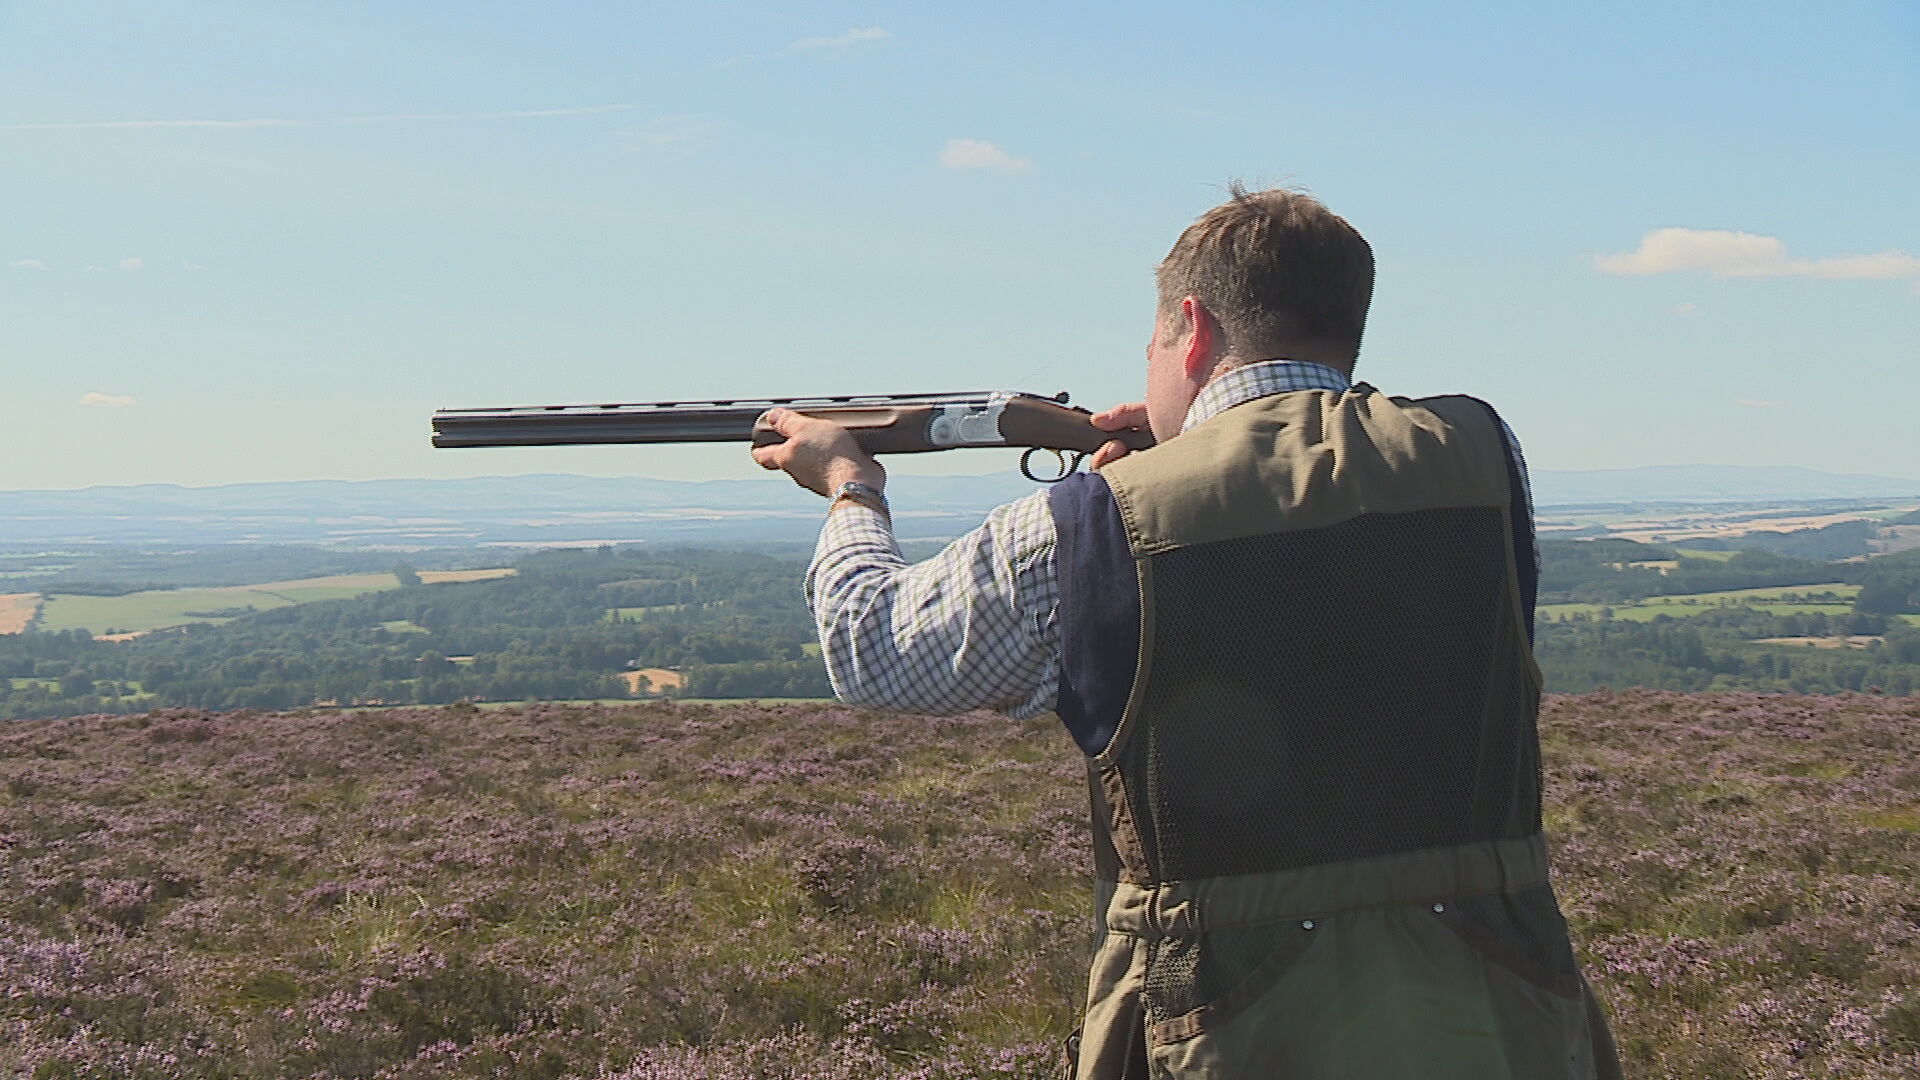 The RSPB said shooting remains a key challenge to the Hen Harrier population.